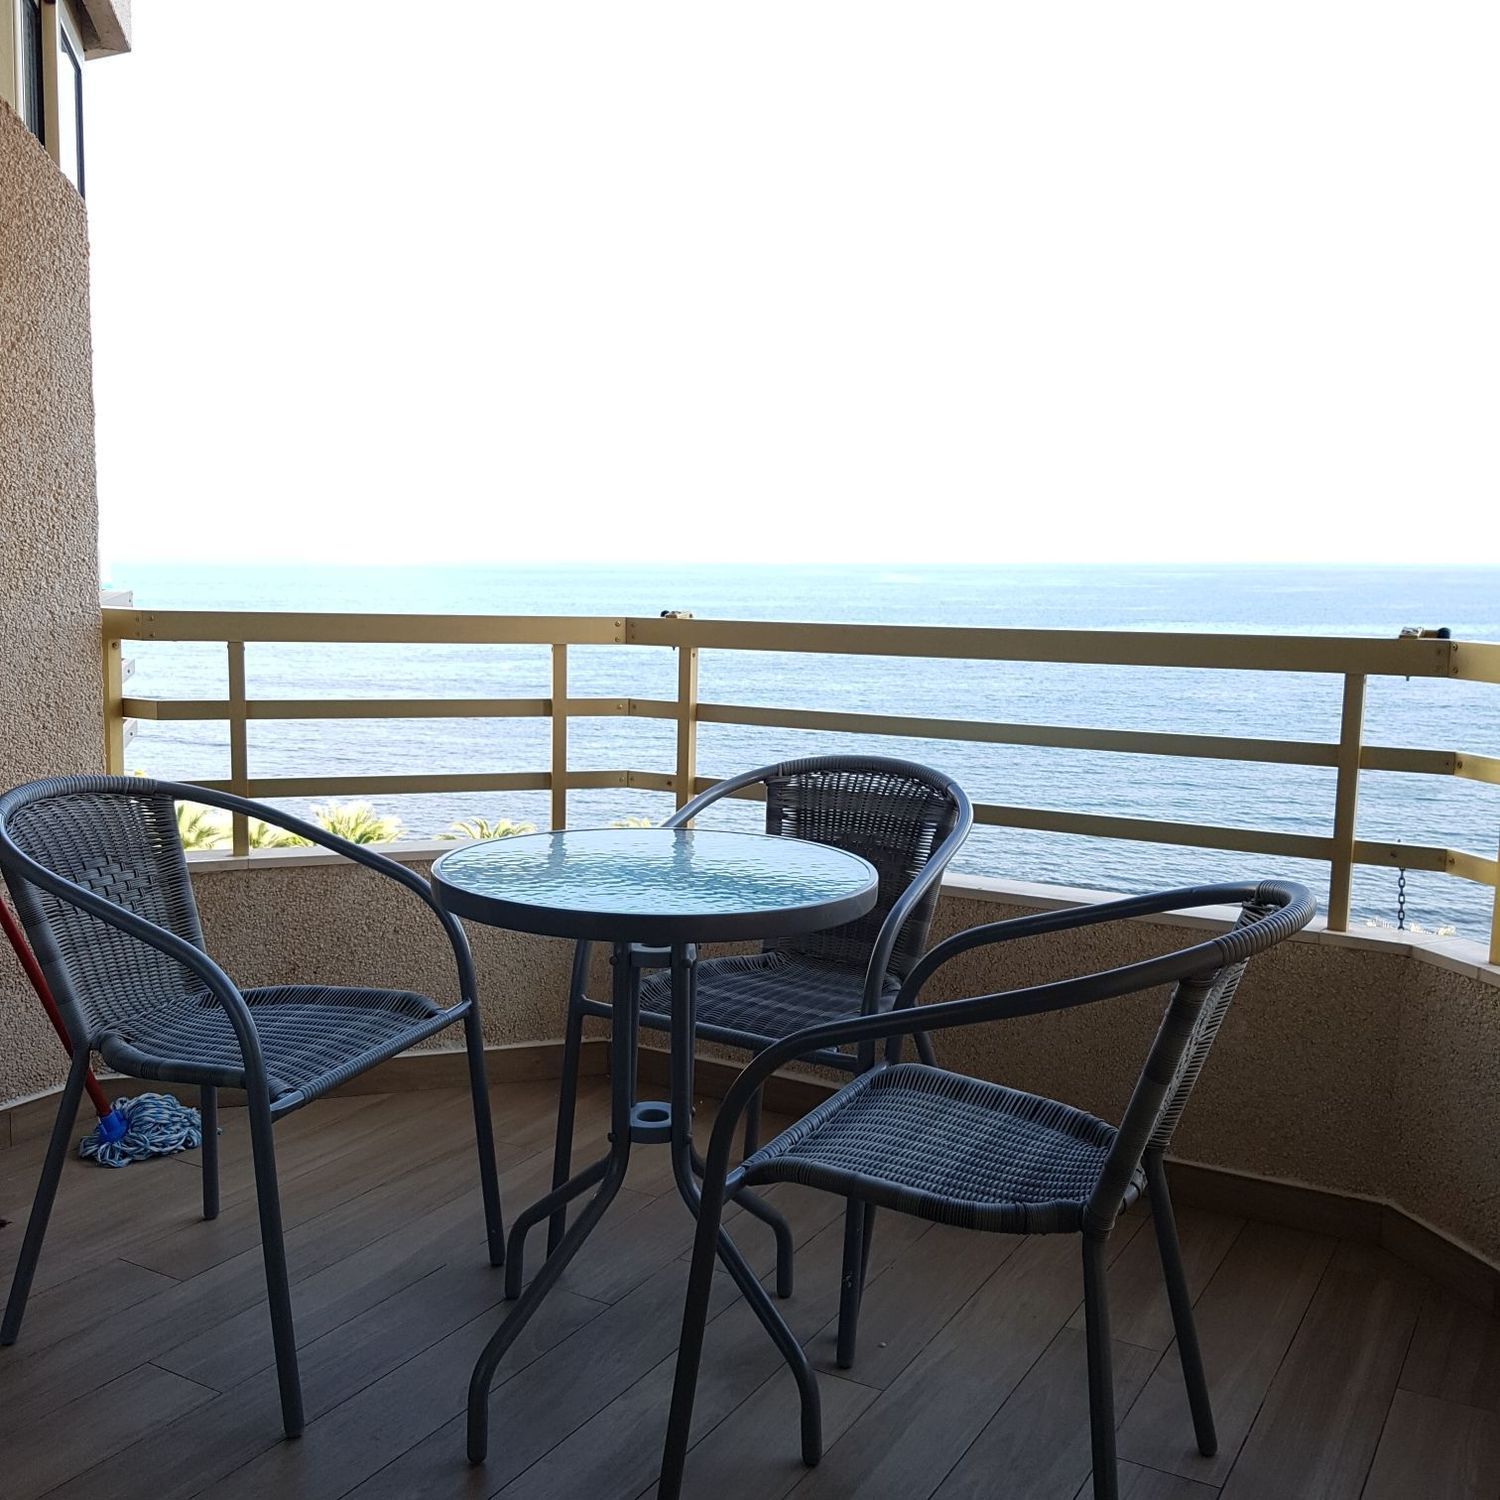 Flat for sale on the seafront in Jaime I El Conquistador, in El Campello